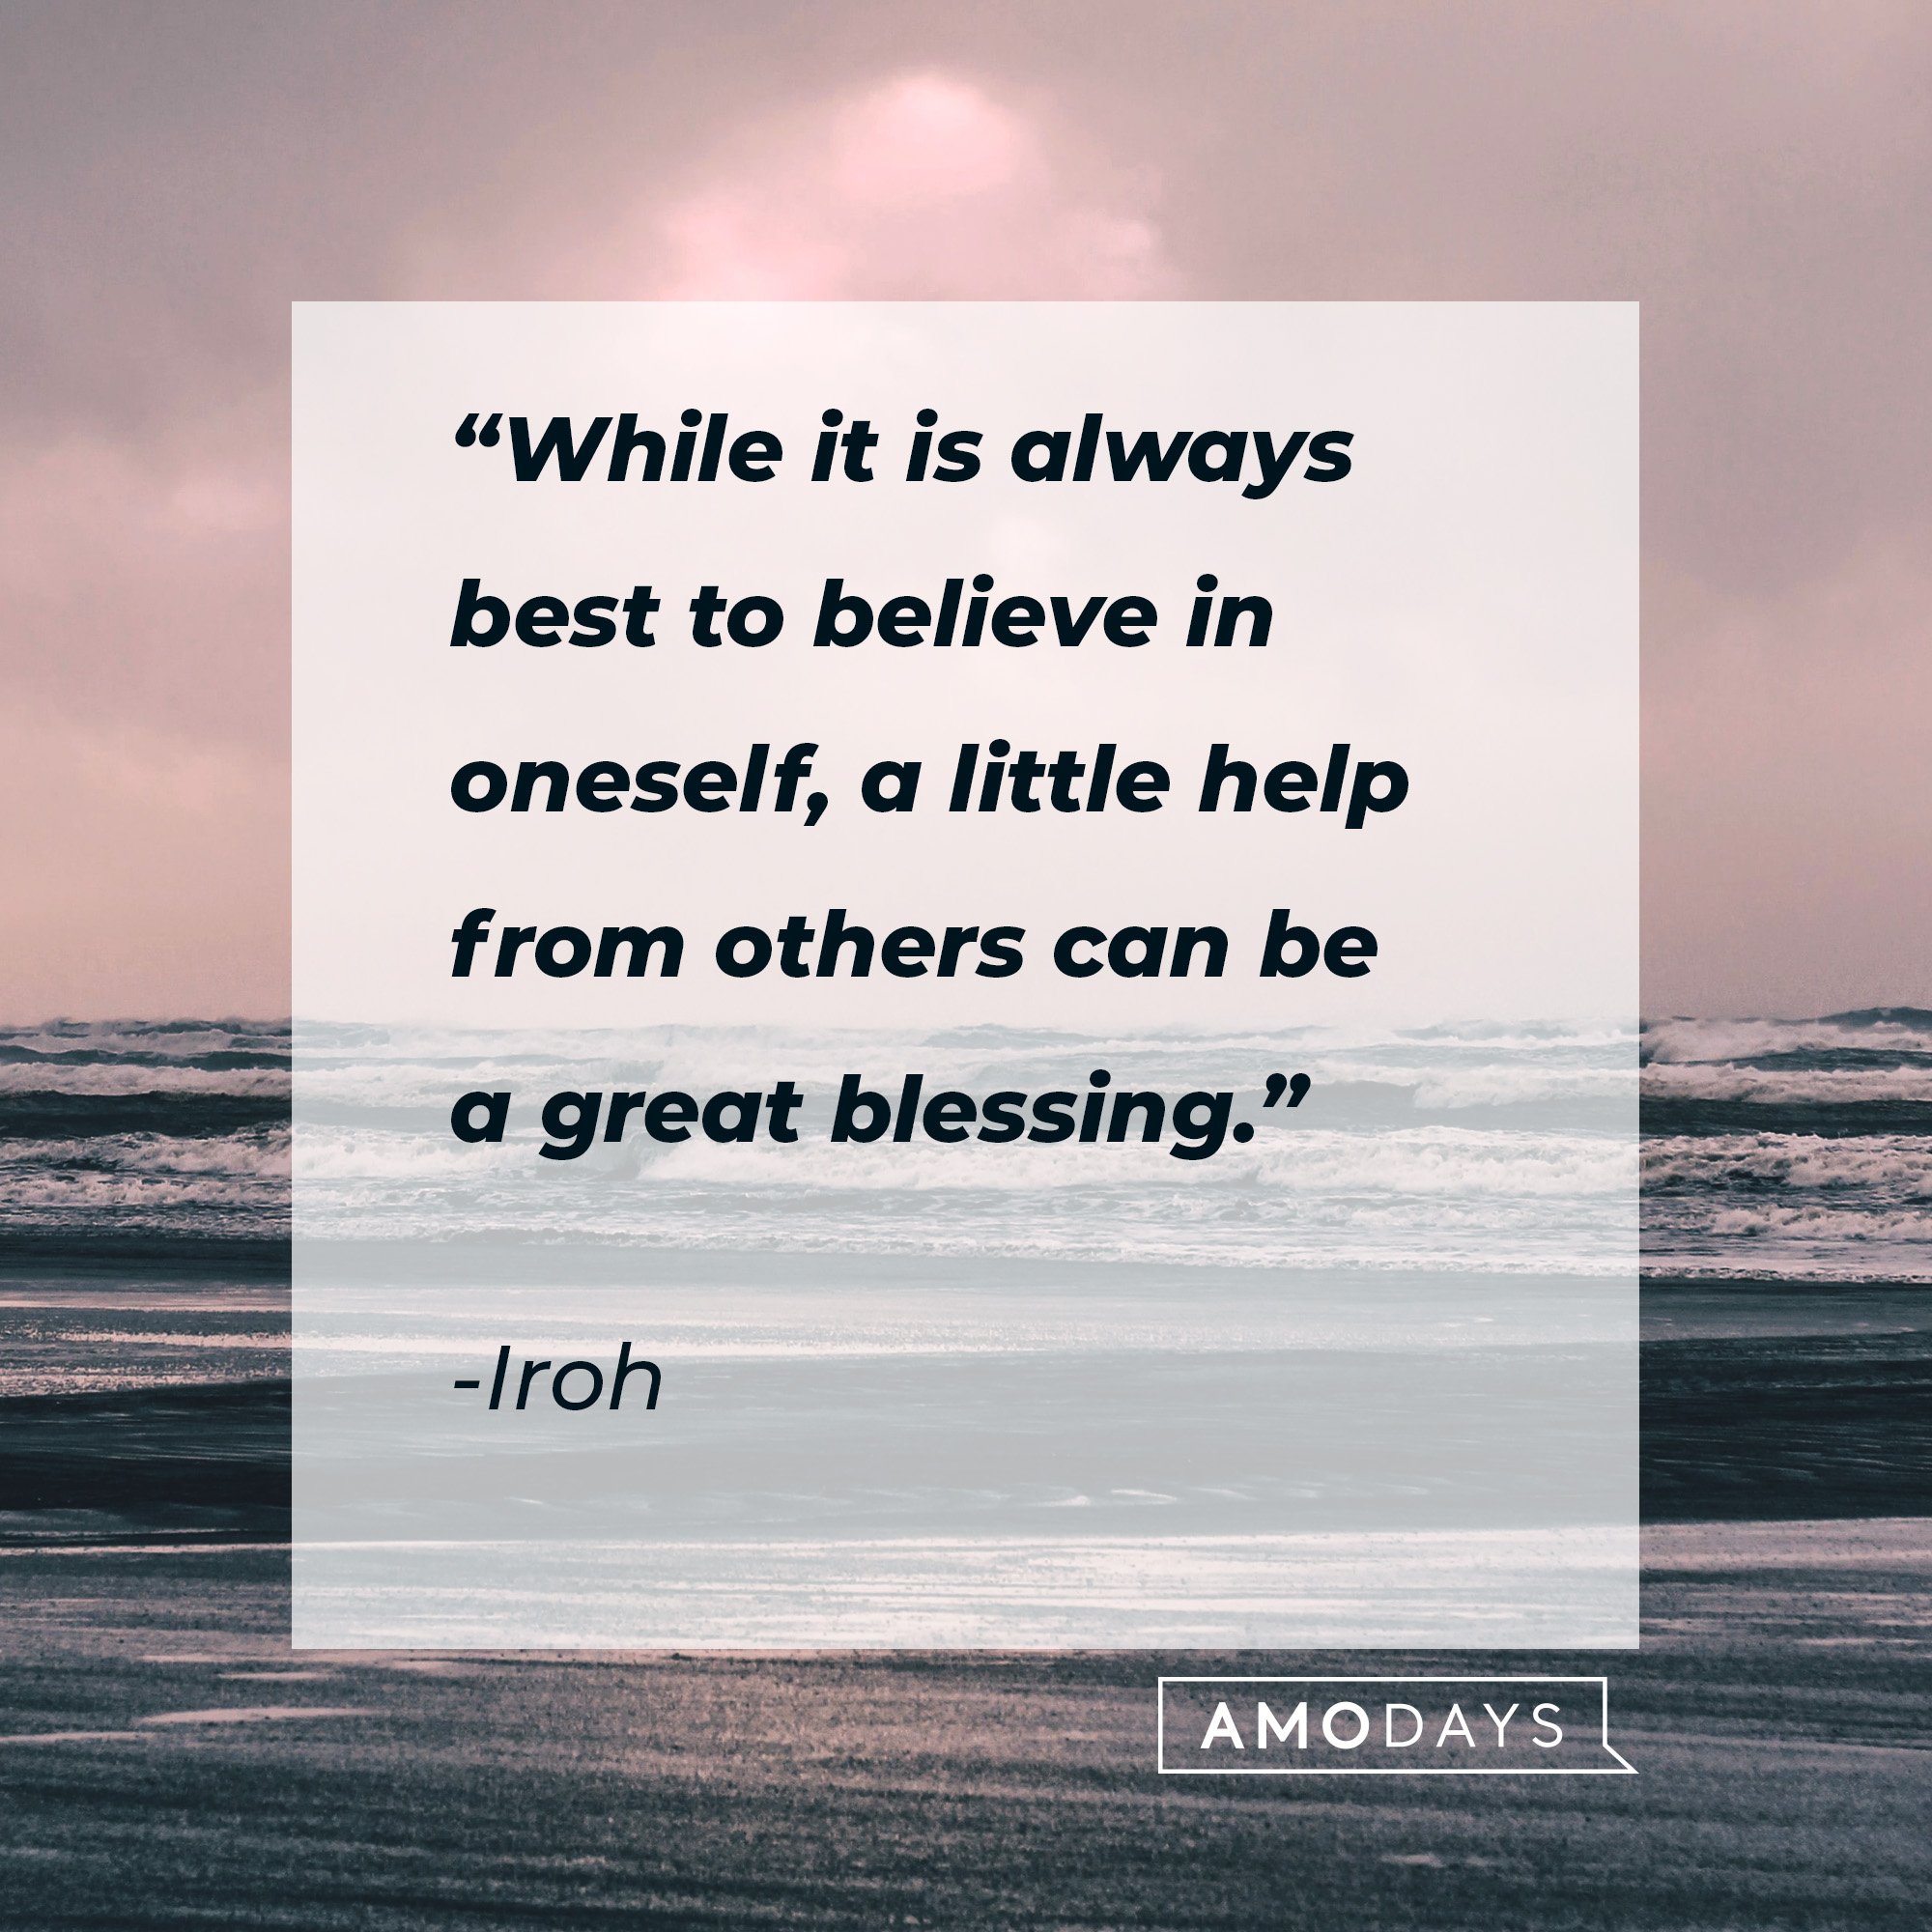 Iroh's quote: “While it is always best to believe in oneself, a little help from others can be a great blessing.” | Image: AmoDays